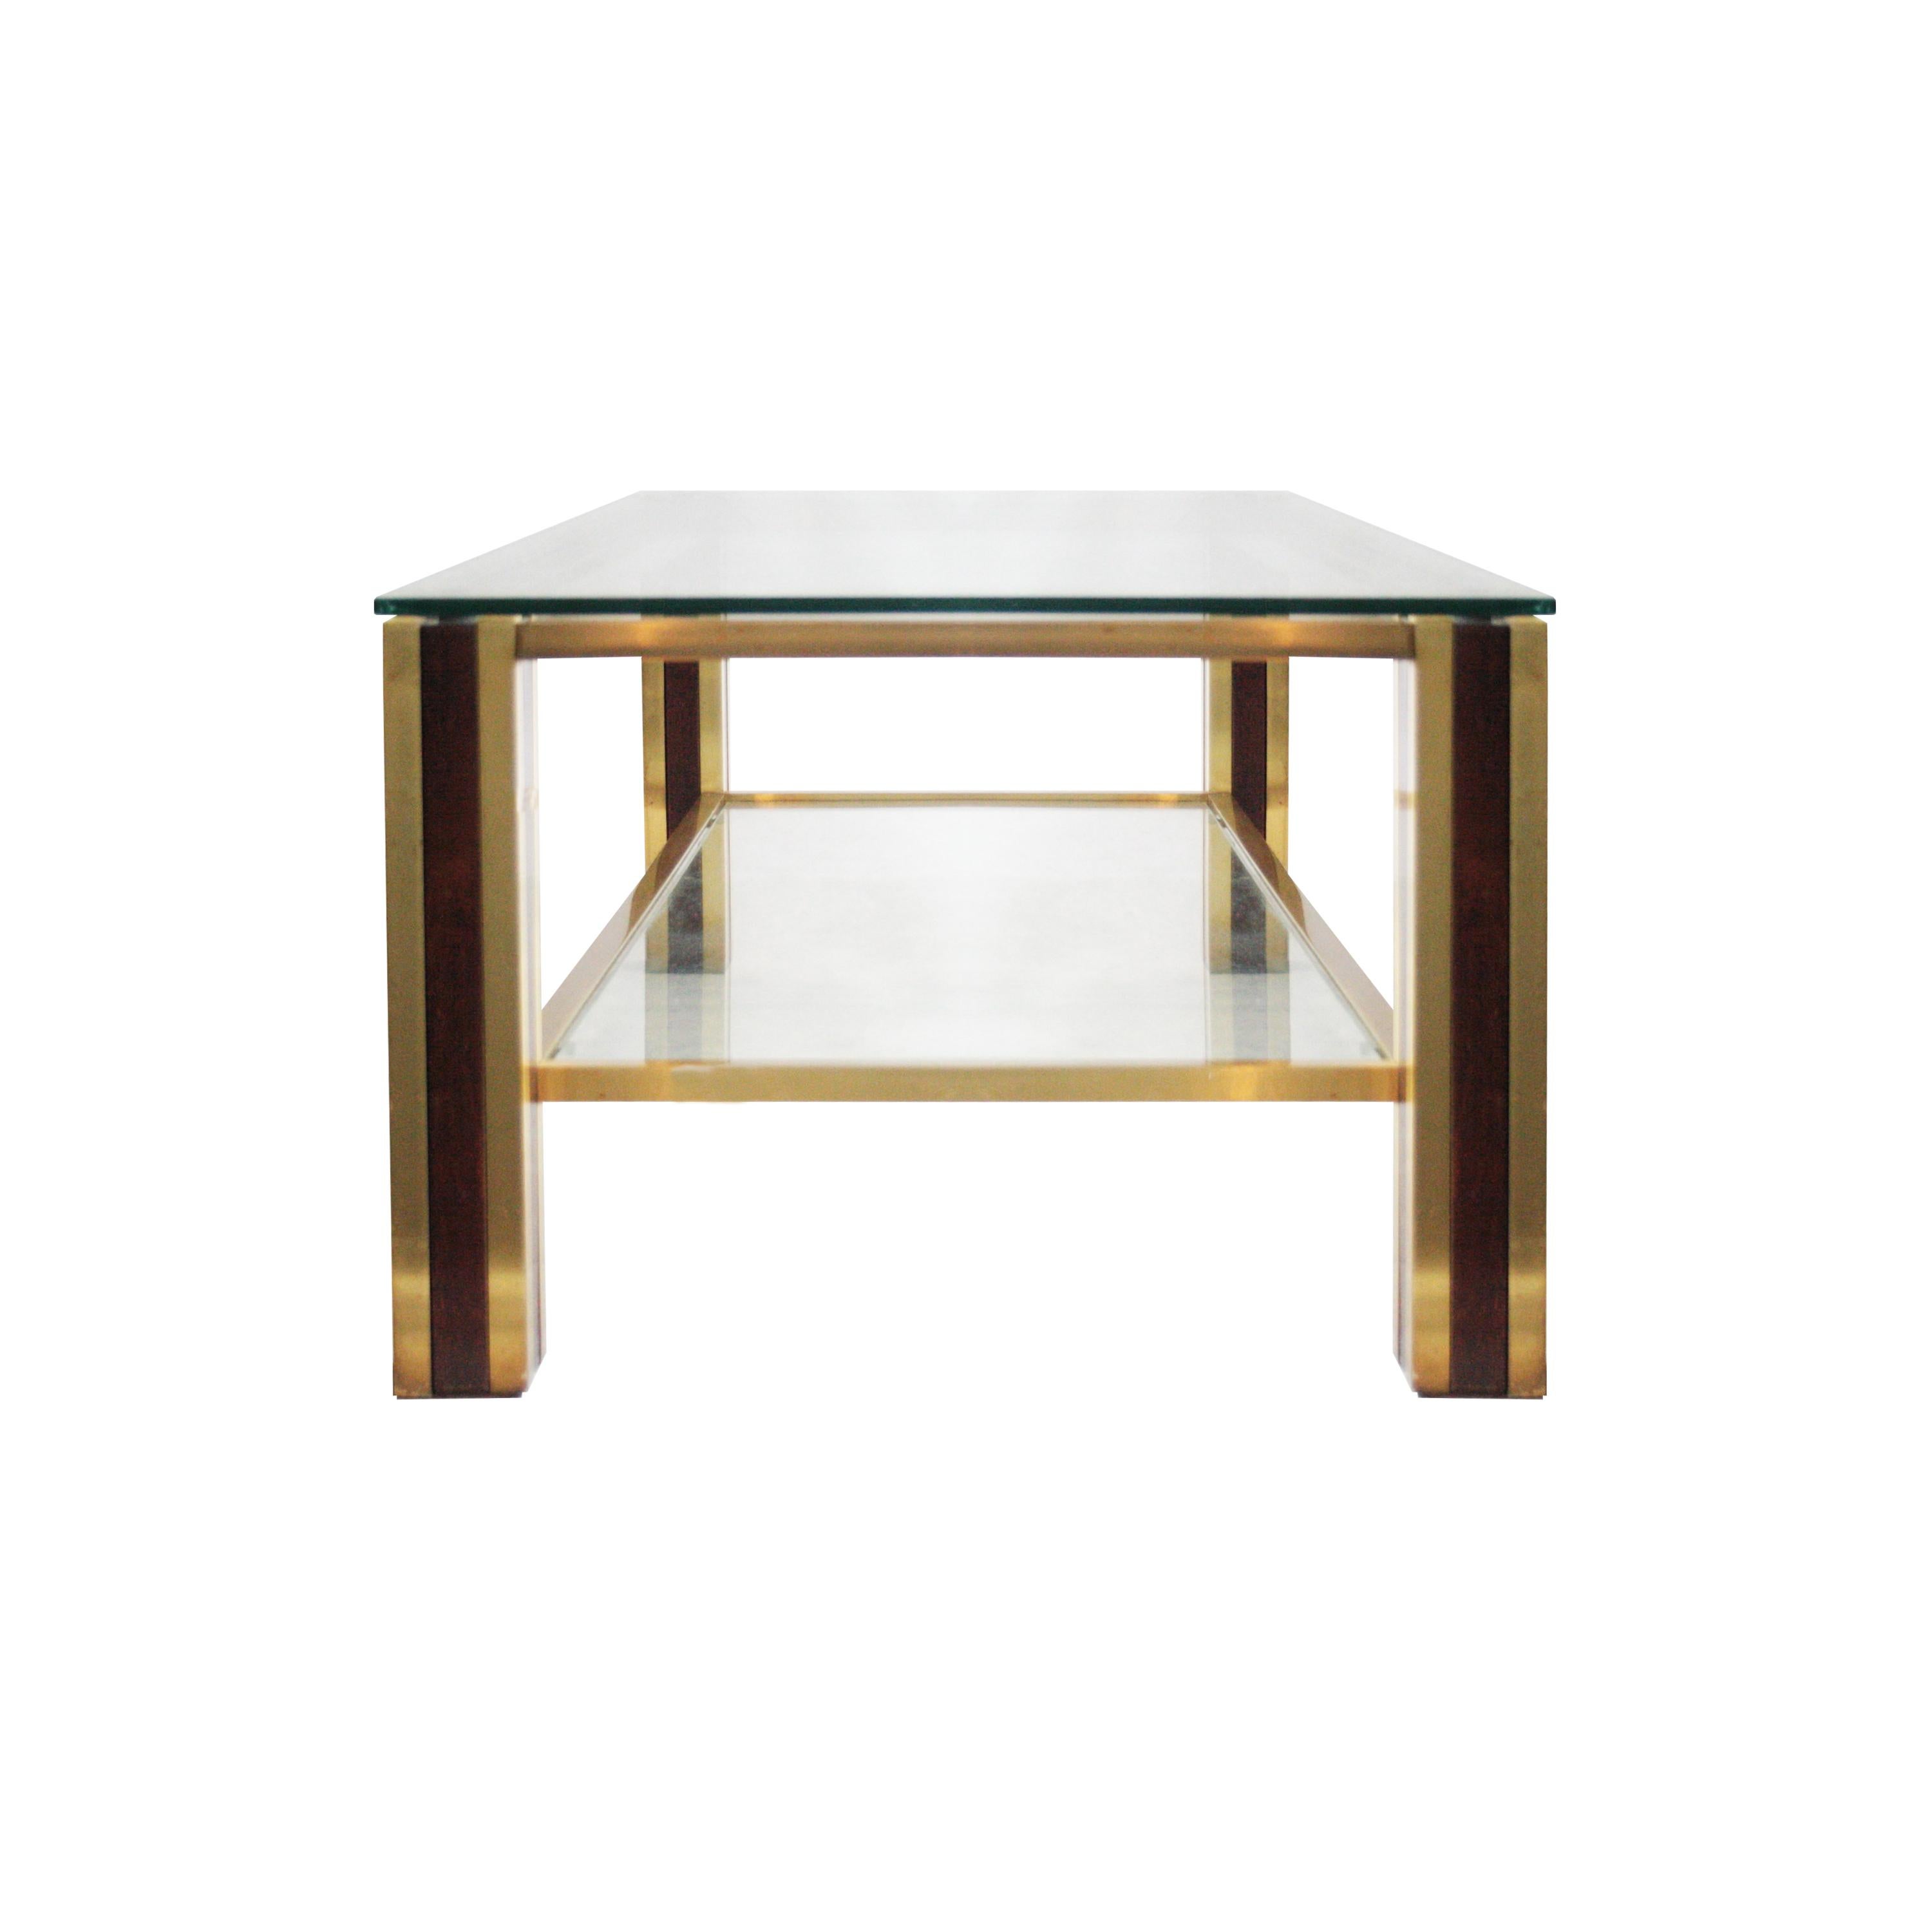 French MidCentury Modern Table with Brass and Solid Walnut Wood Structure, France, 1970 For Sale